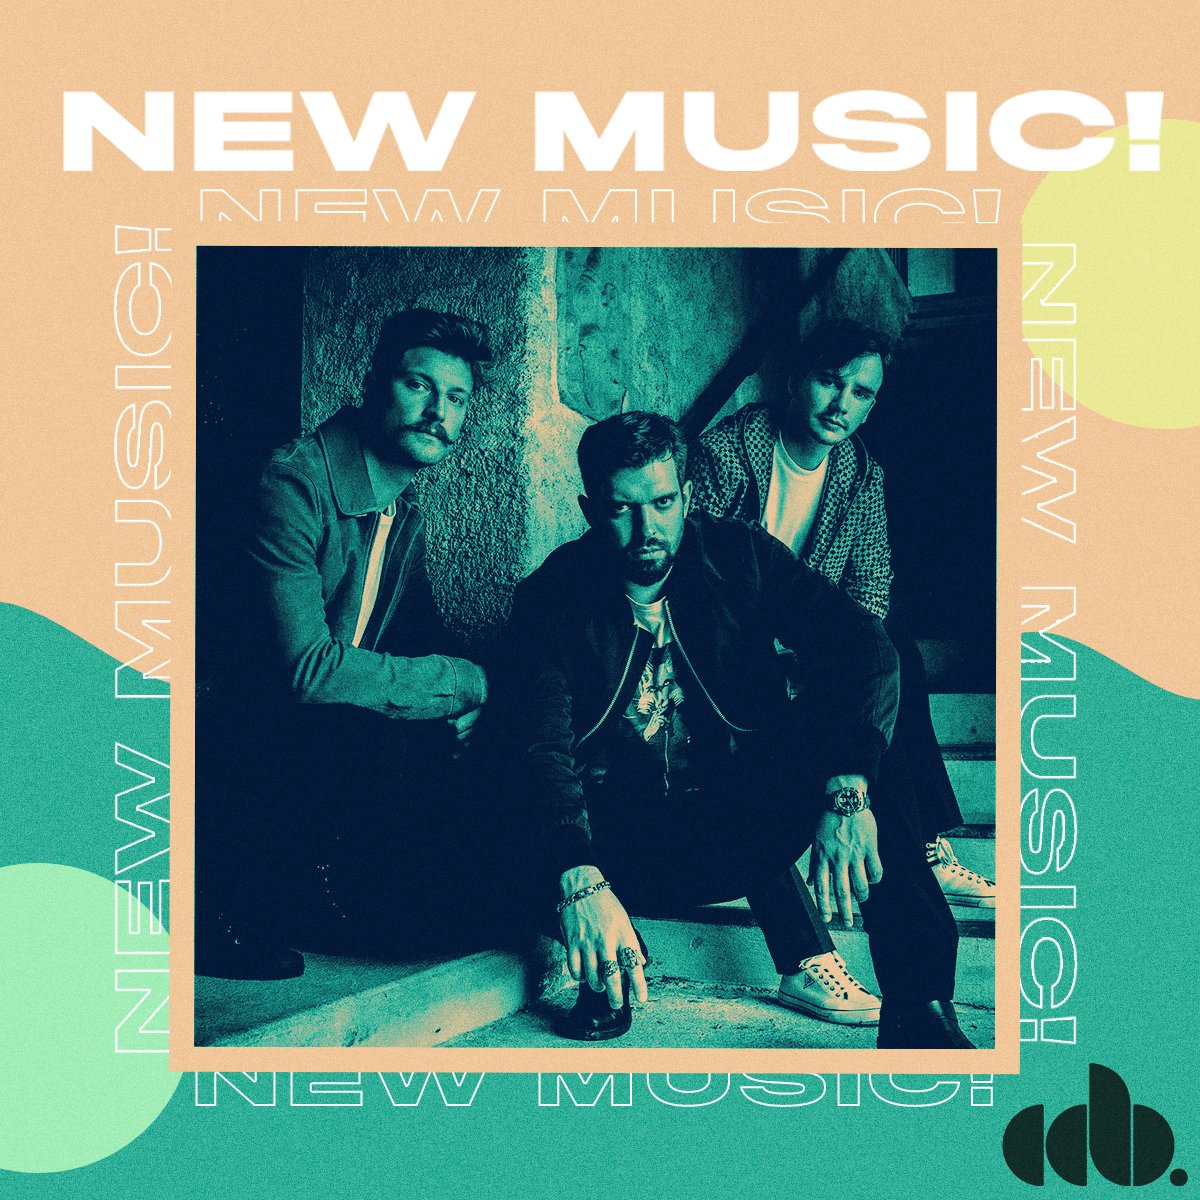 It’s new music Friday! Our New Music playlist features new tunes from @Gracchus, @huntertonesband, @JohnnyTillotson and more CD Baby artists. Listen: spoti.fi/37348LQ